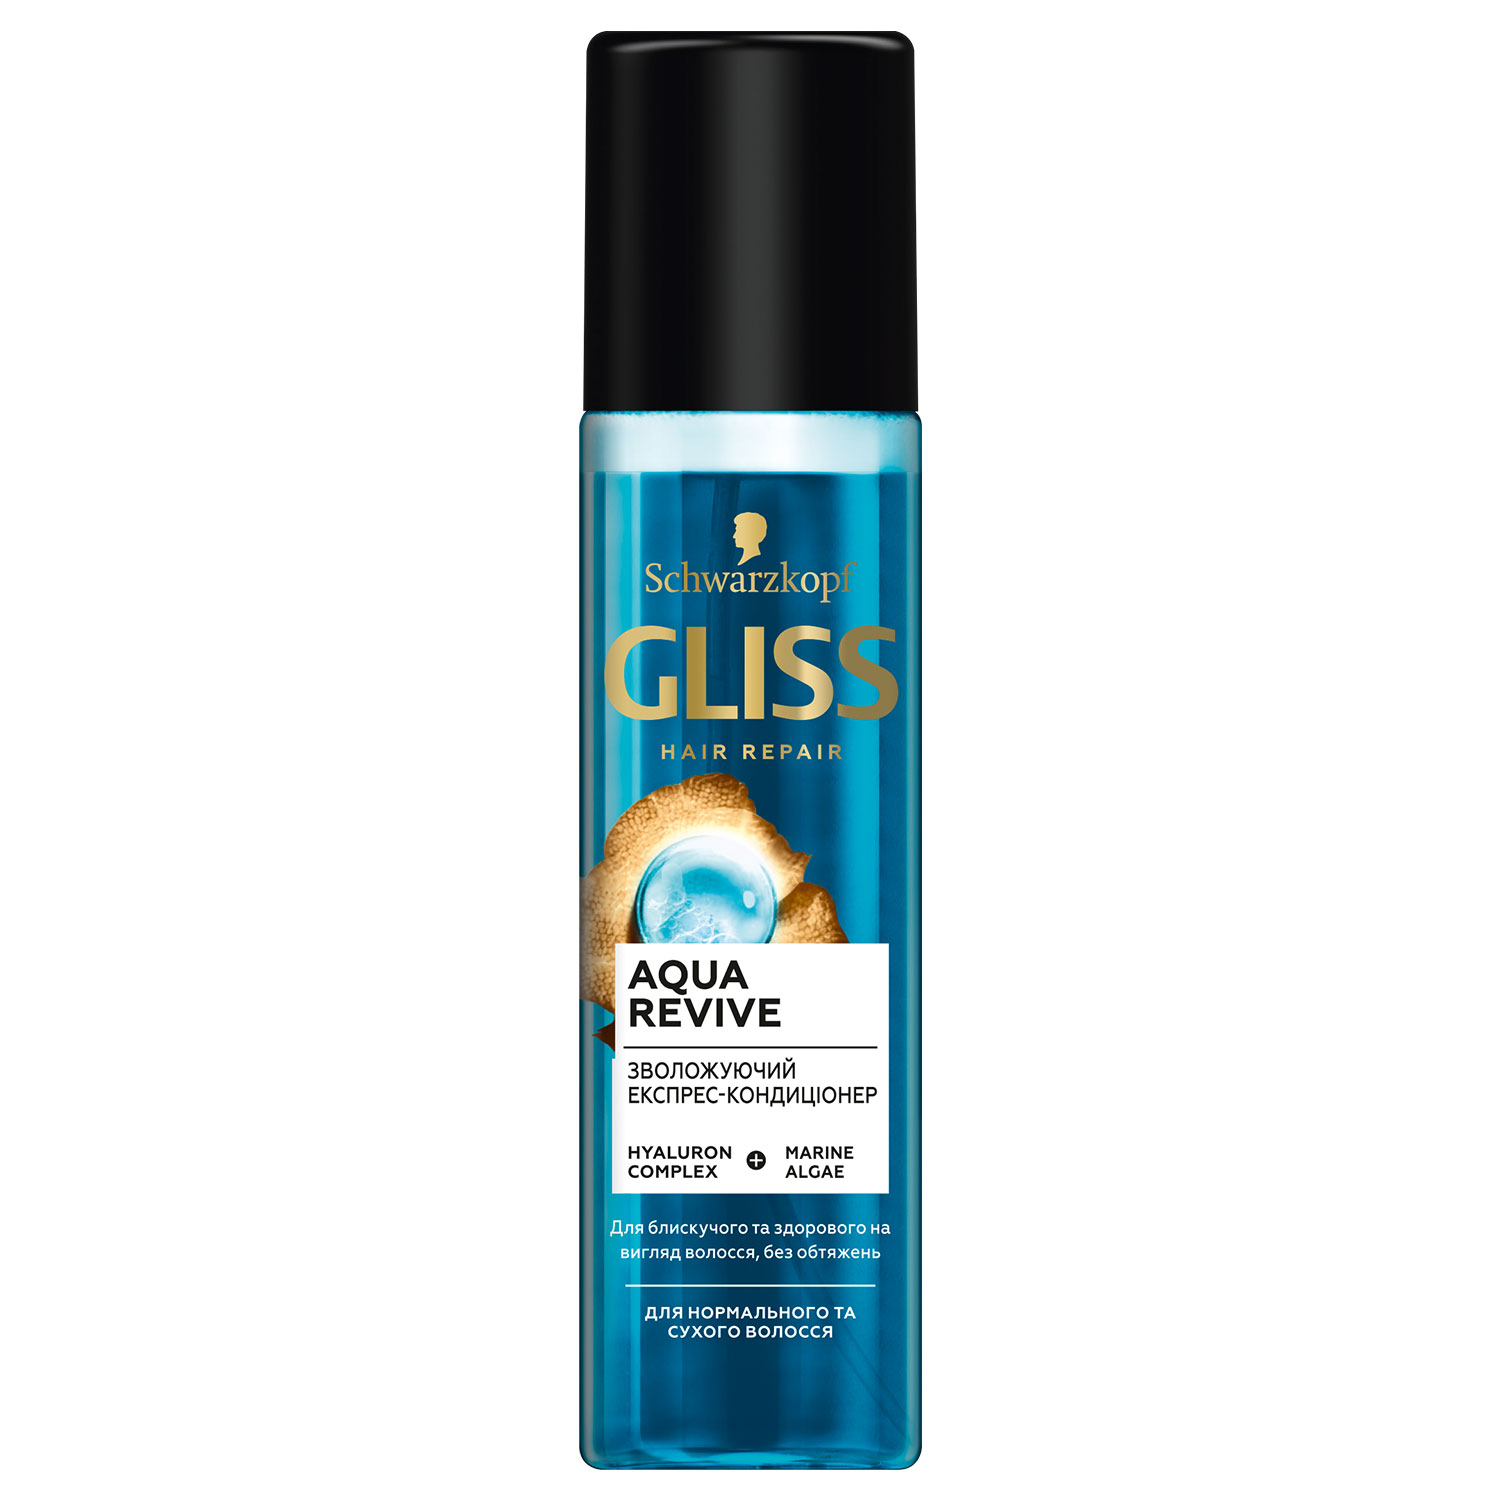 GLISS Moisturizing Express-Repair-Conditioner Aqua Revive 200 ml with Hyaluron and Marine Algae, Deep Moisture Conditioner for Dry Hair to Normal Hair